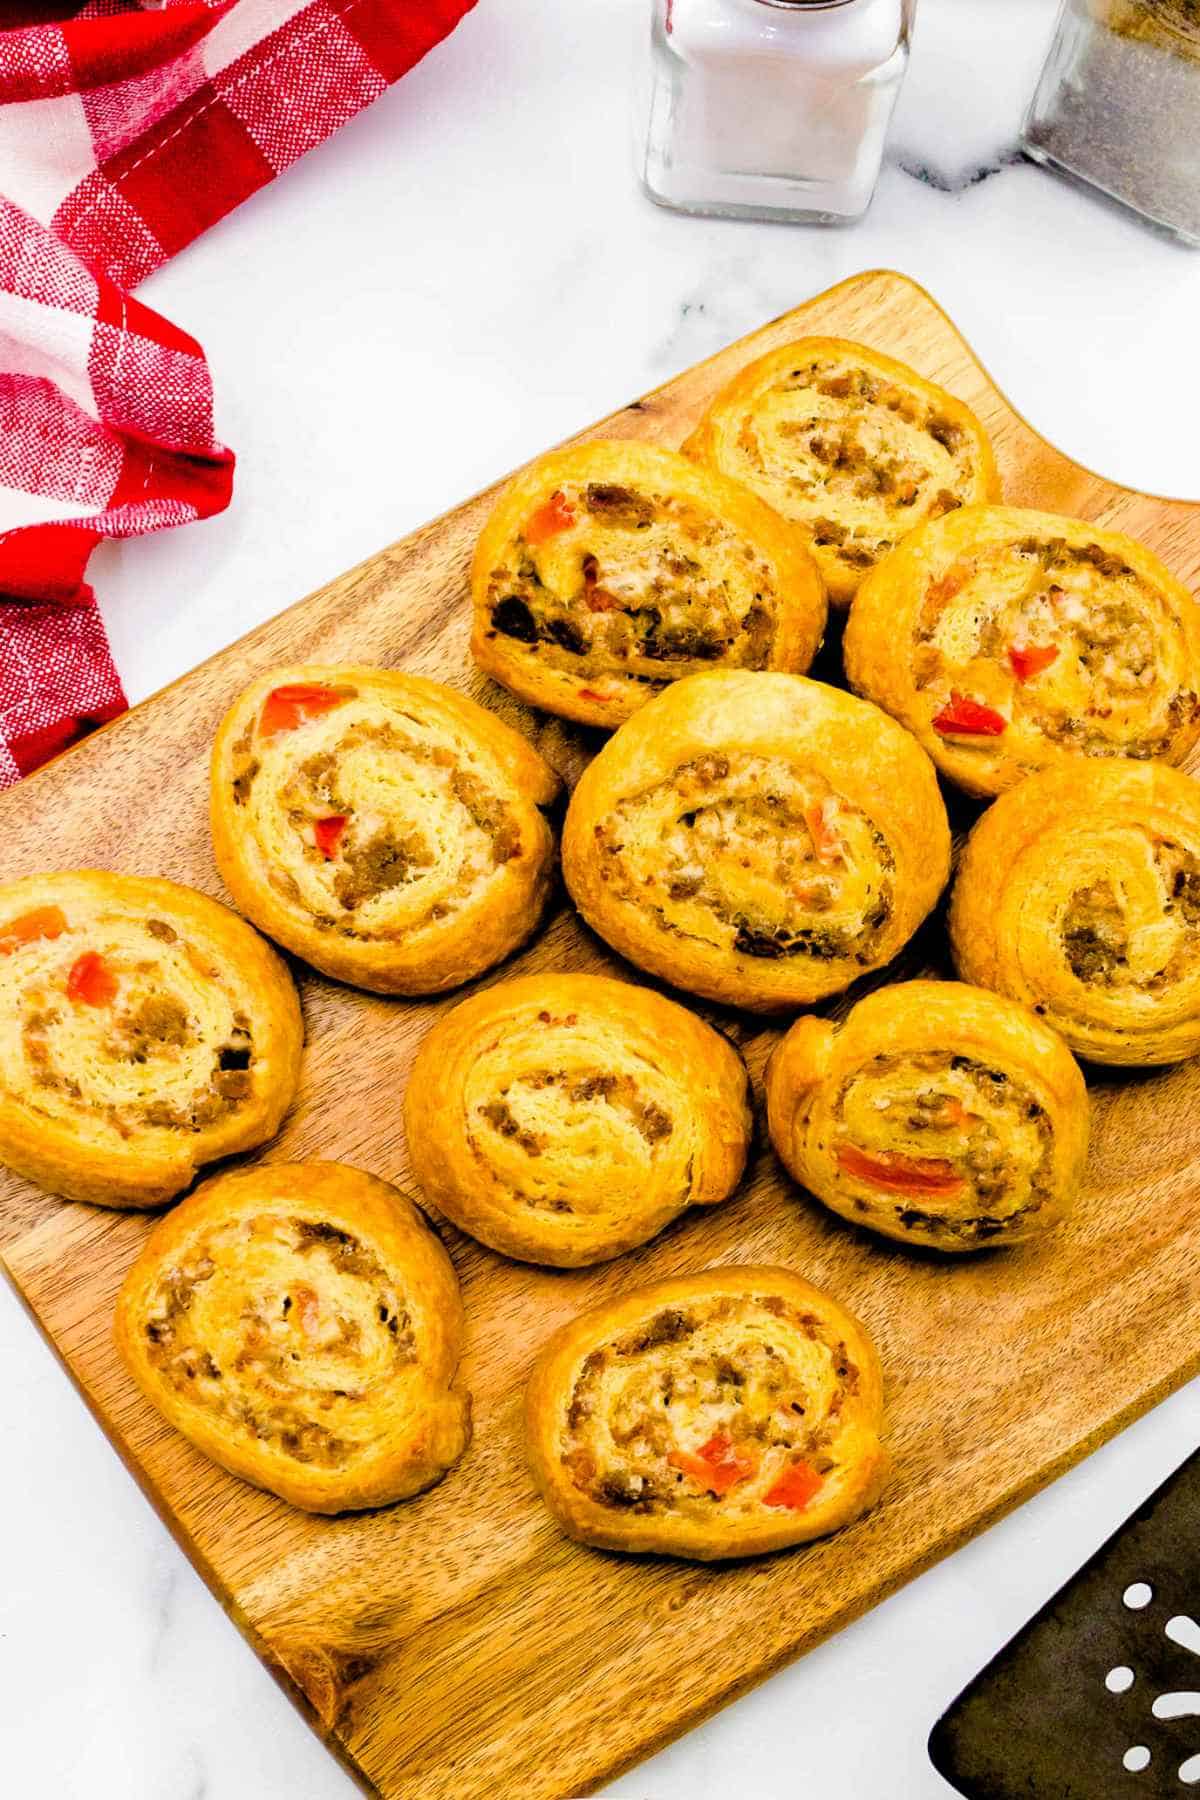 baked sausage filled crescent roll appetizers.